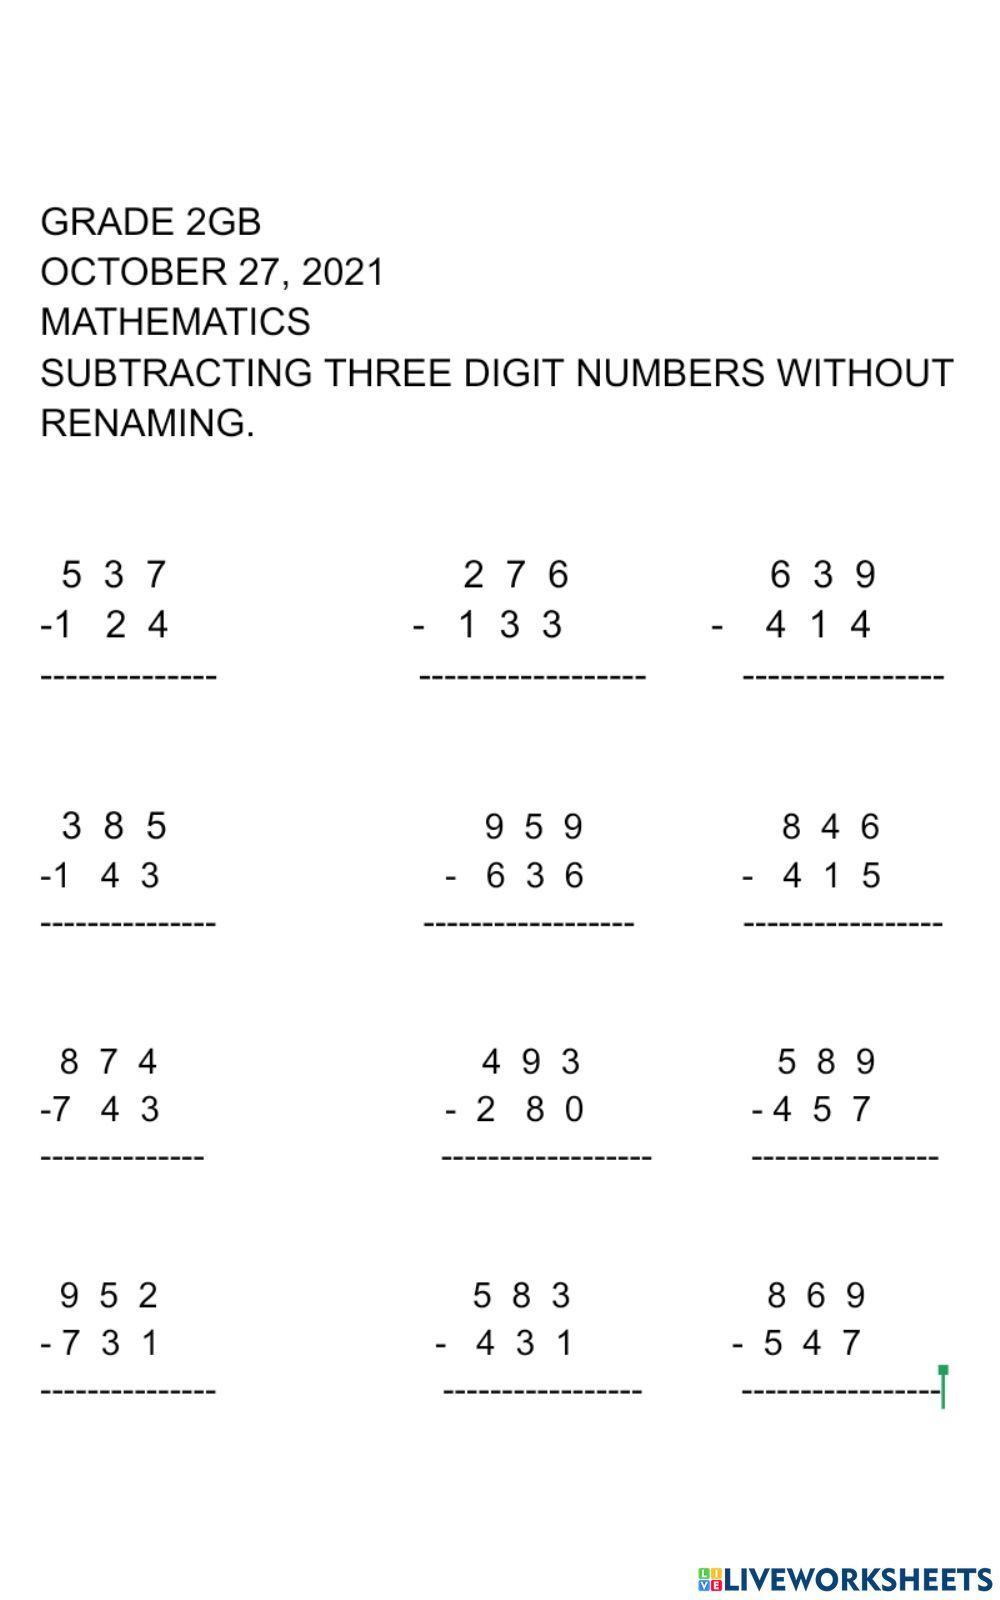 Subtraction of 3 digit numbers Without Renaming